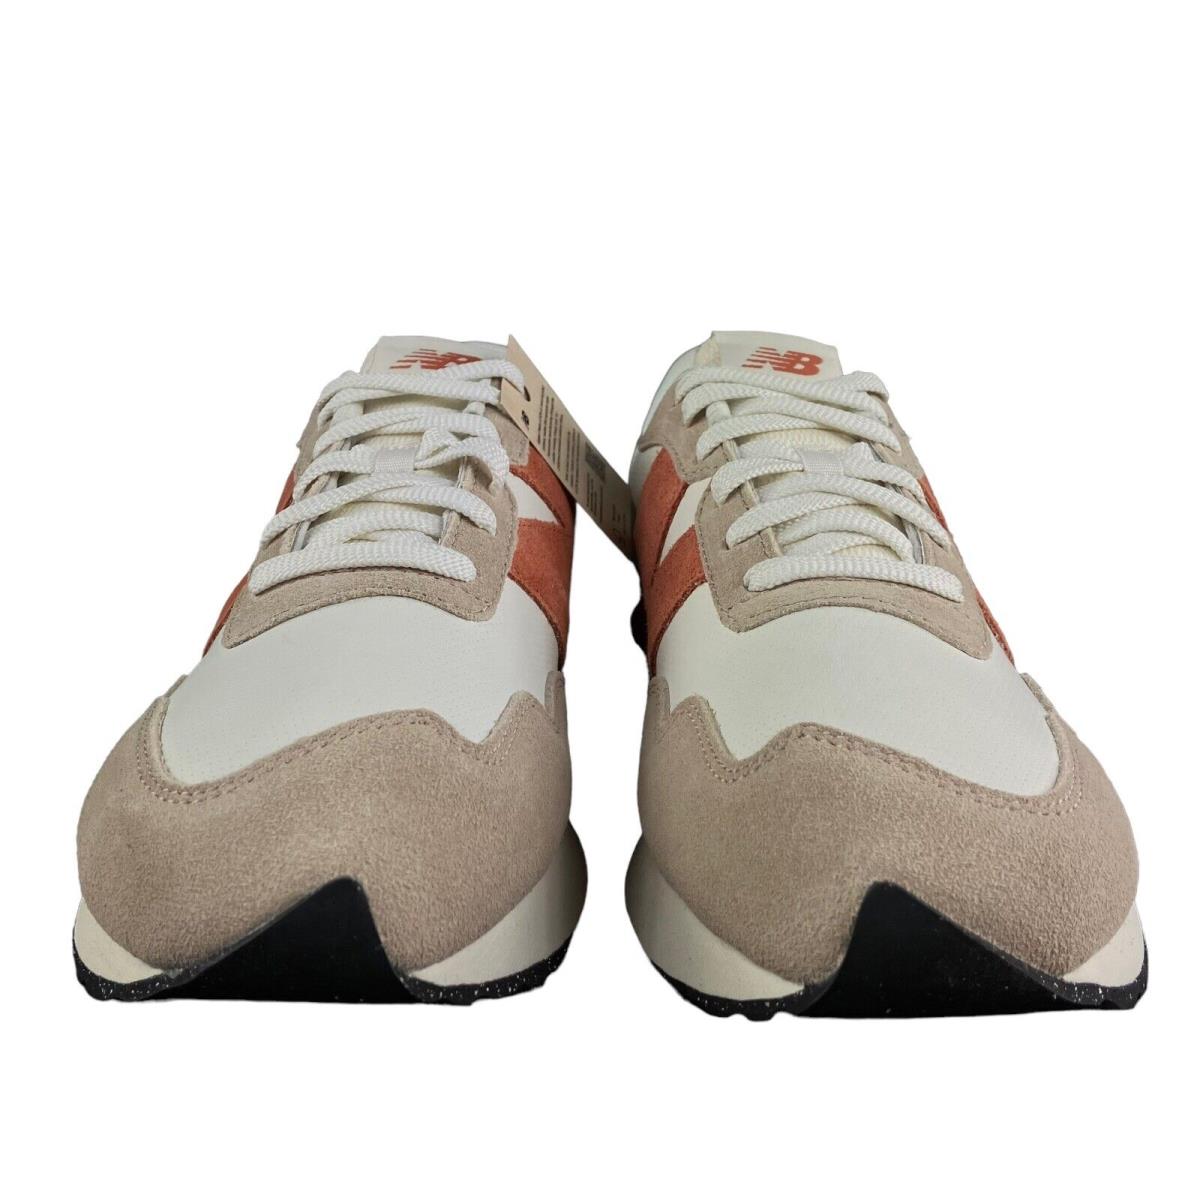 New Balance Men`s 237 V1 Mindful Grey Calm Taupe Shoes MS237RB Sizes 8.5 - 13 D